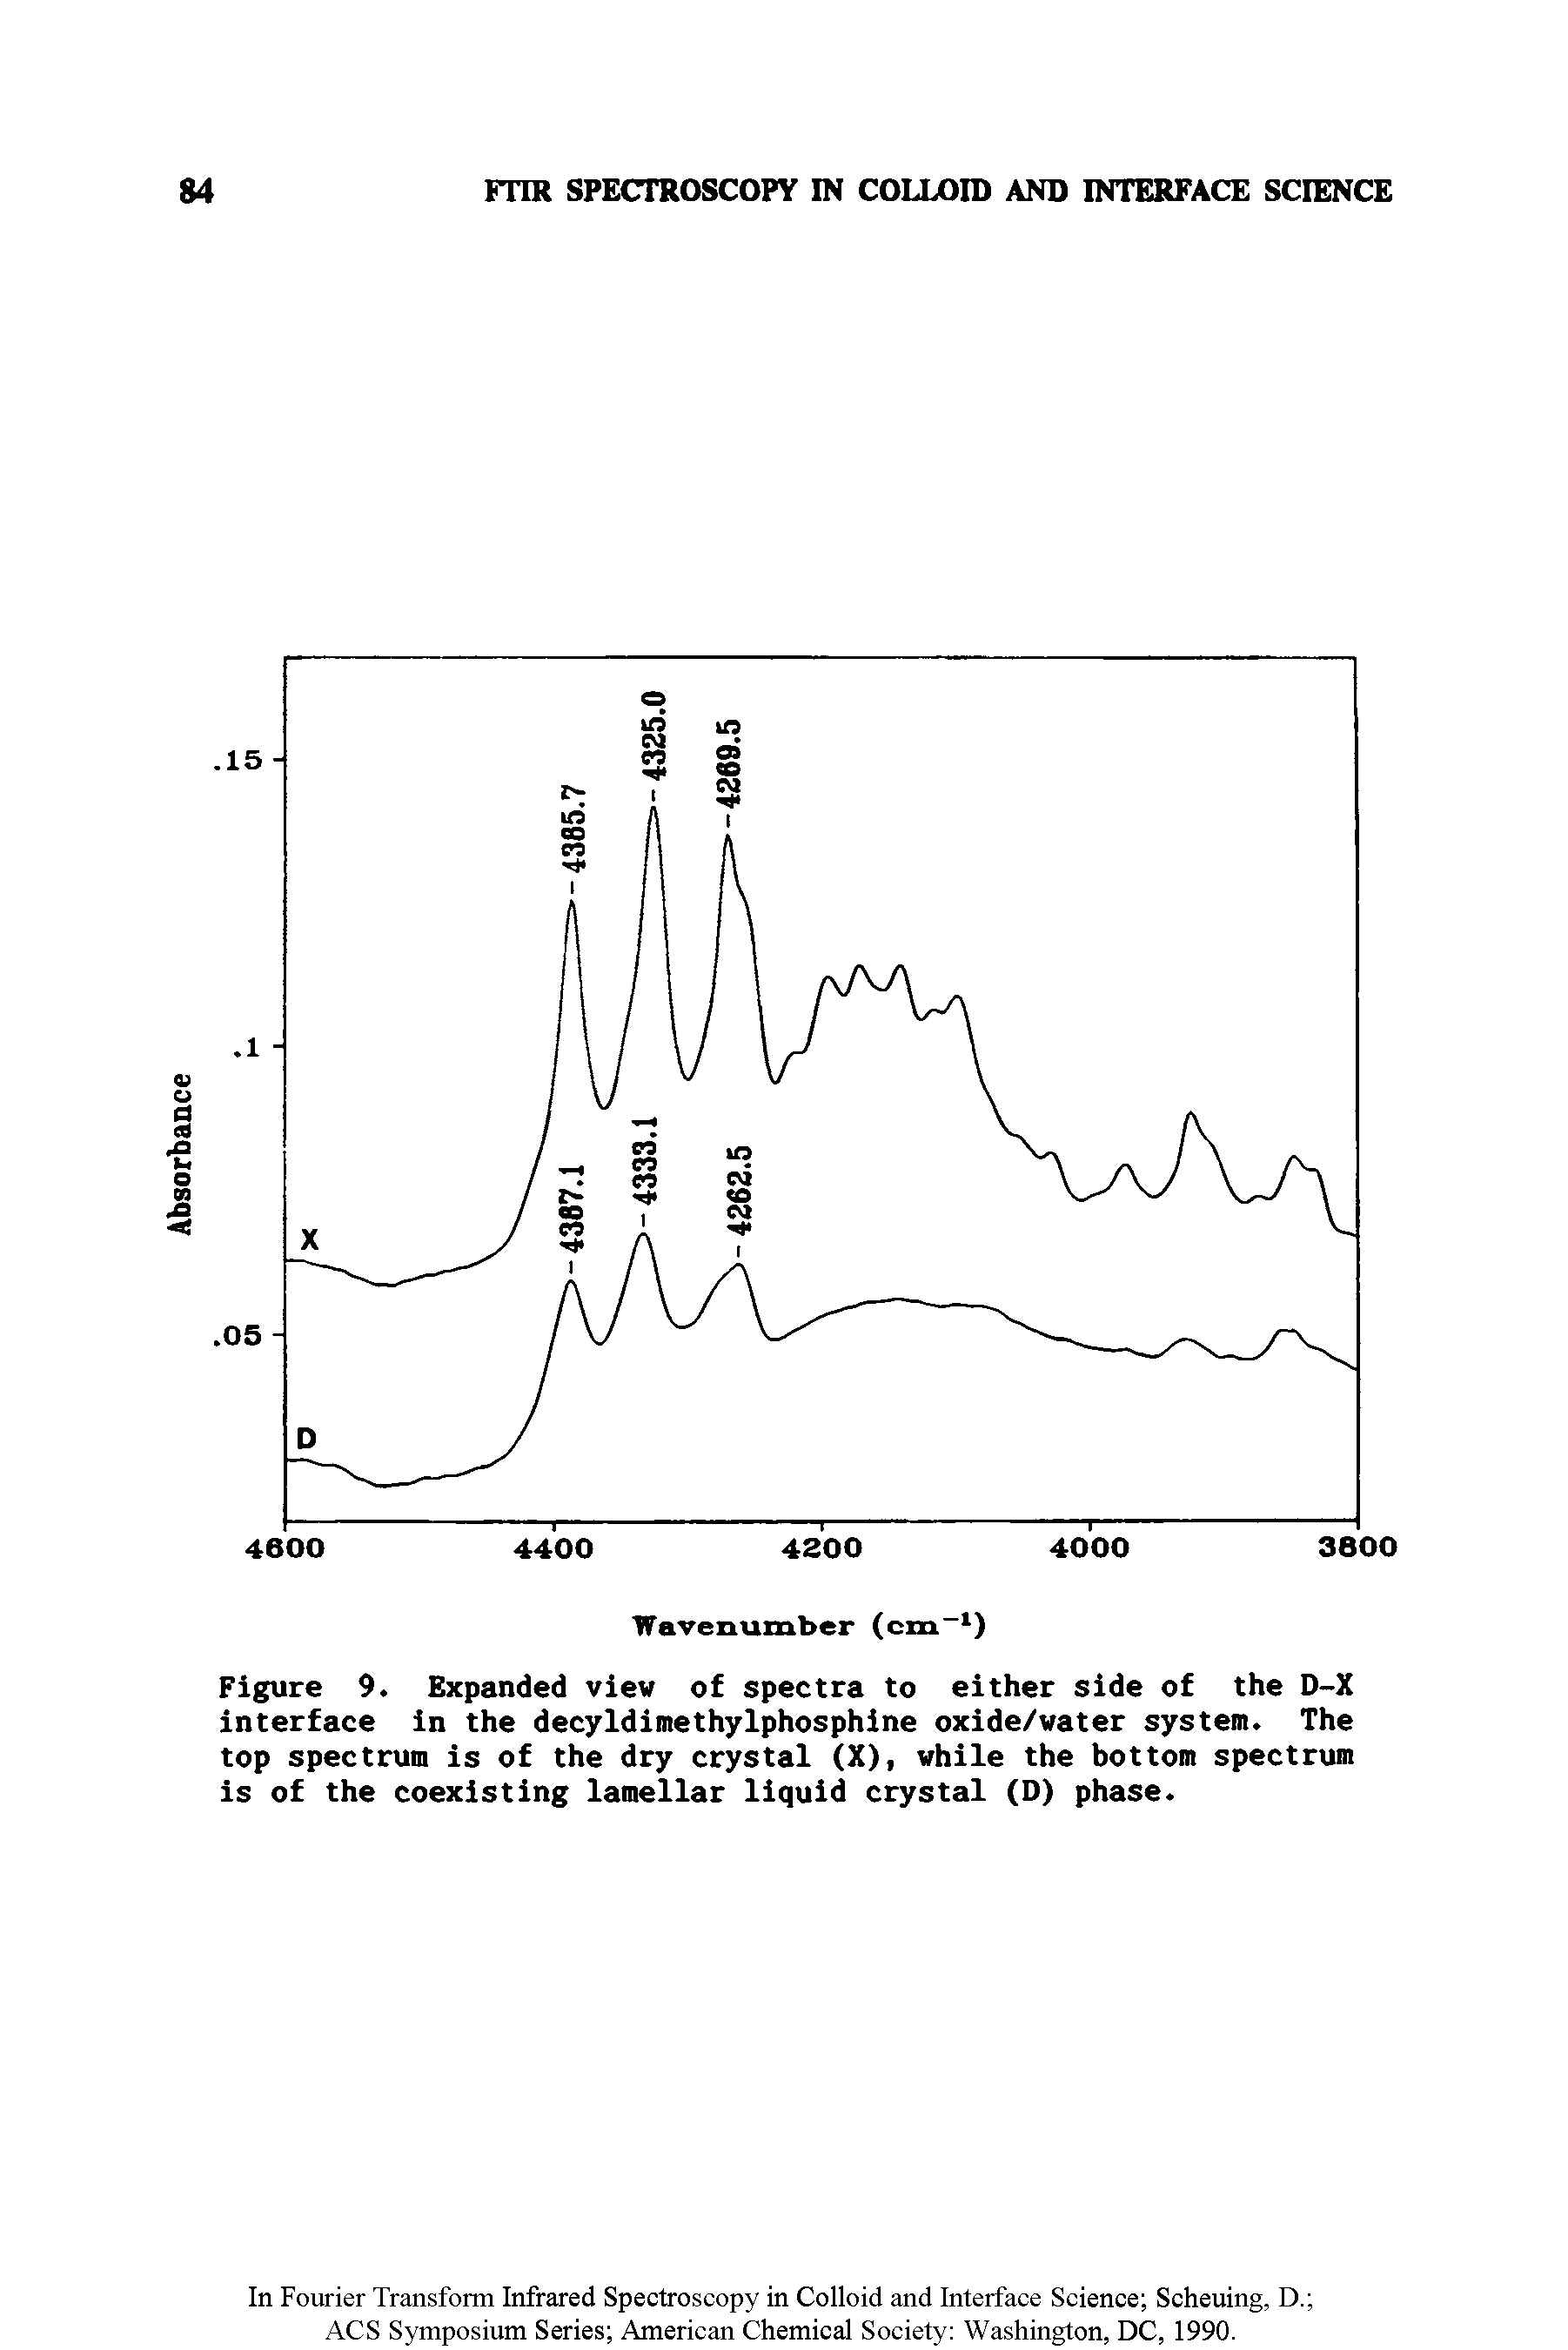 Figure 9. Expanded view of spectra to either side of the D-X interface in the decyldimethylphosphlne oxide/water system. The top spectrum is of the dry crystal (X), while the bottom spectrum is of the coexisting lamellar liquid crystal (D) phase.